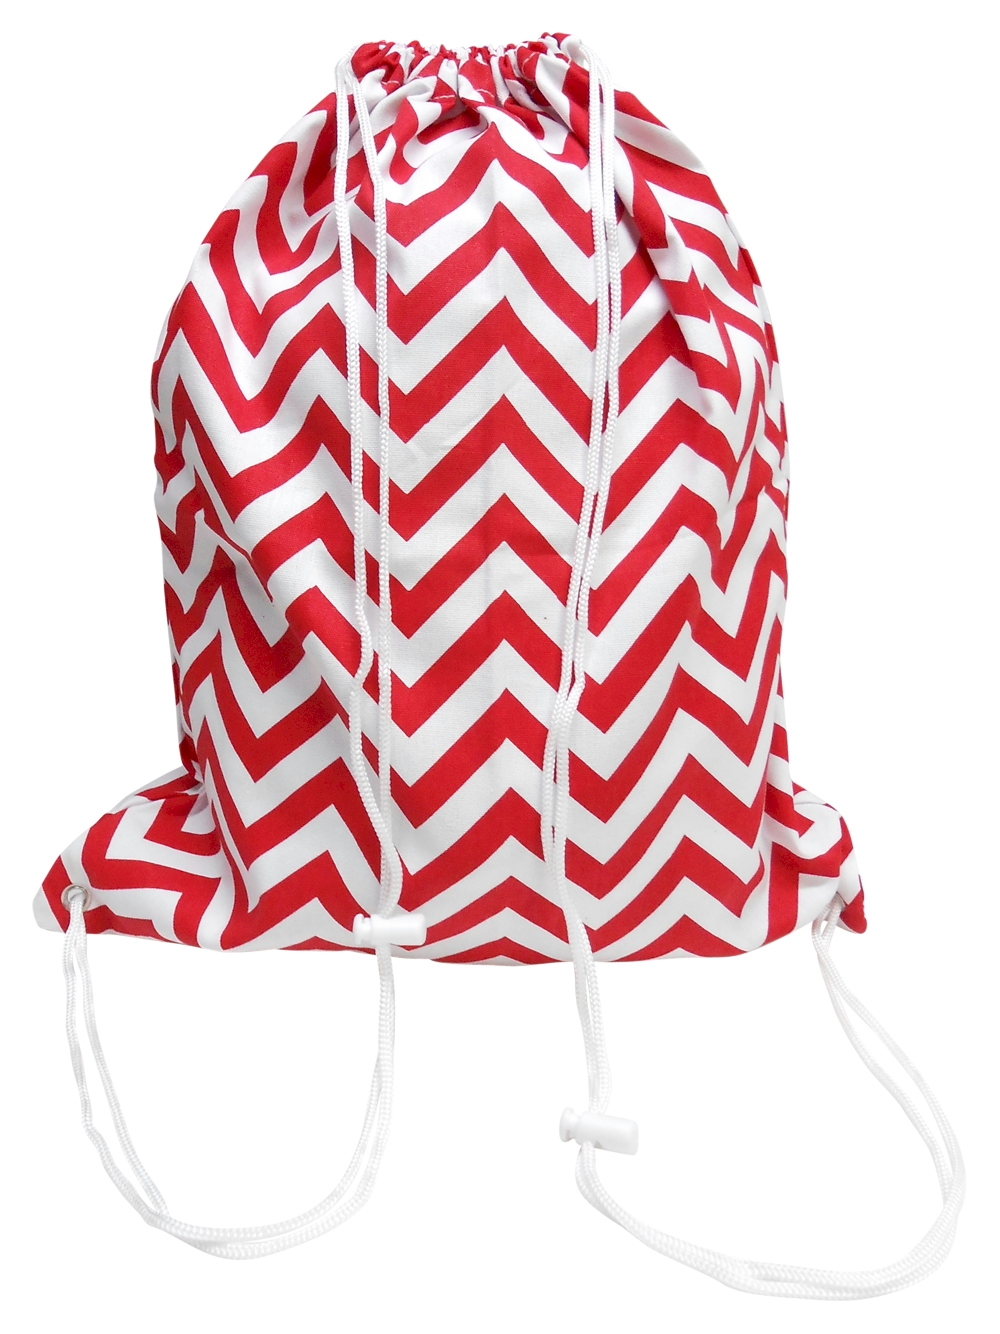 Gym Bag Drawstring Pack Embroidery Blanks in Chevron Print - RED